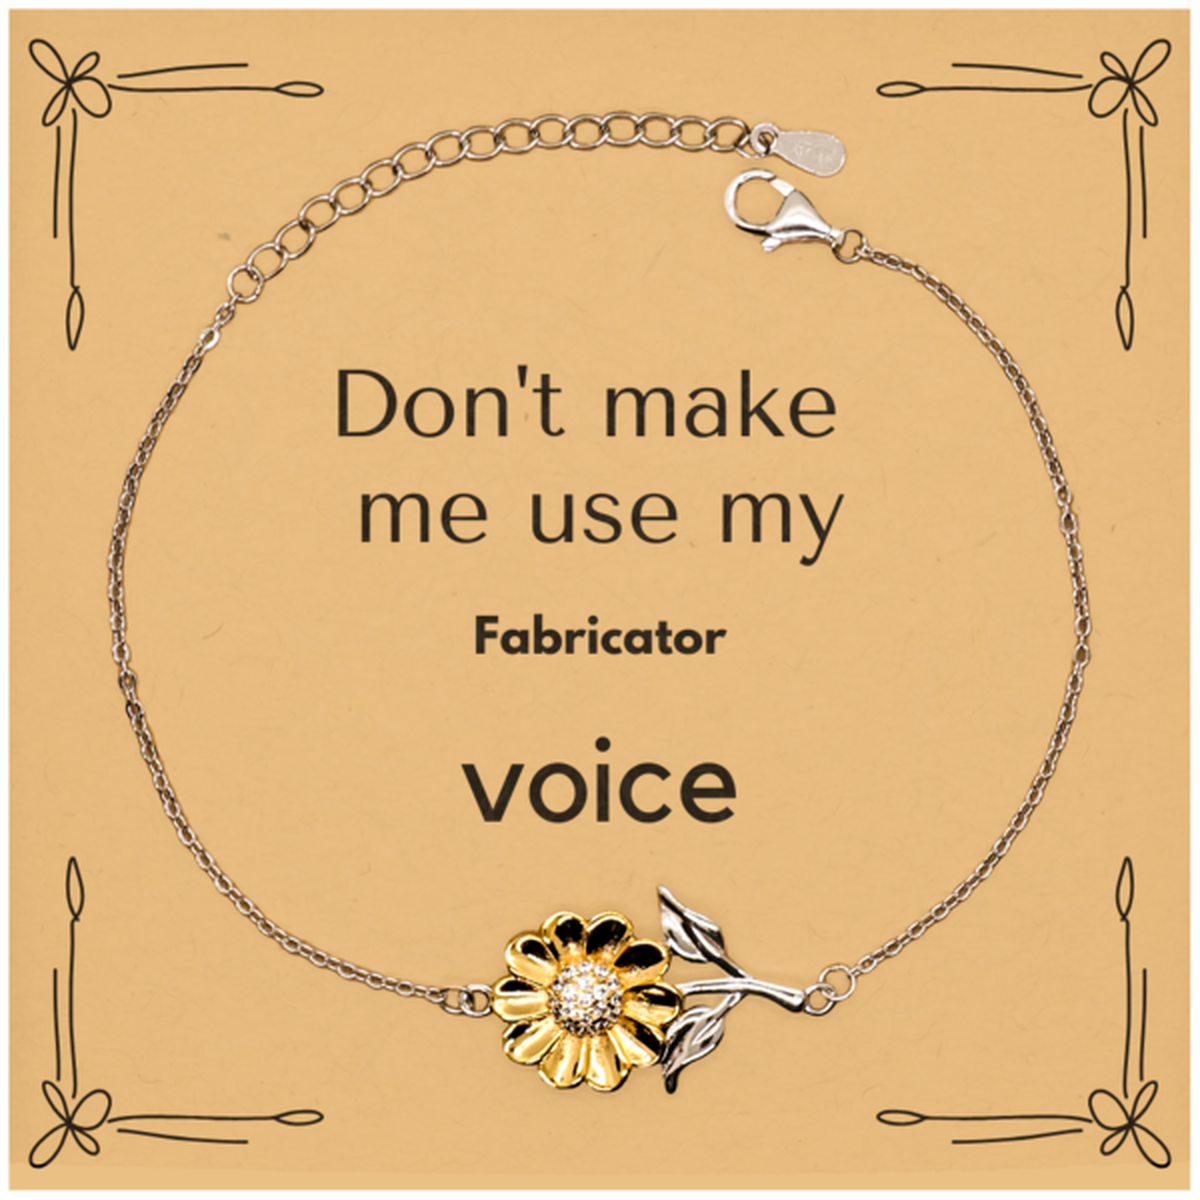 Don't make me use my Fabricator voice, Sarcasm Fabricator Card Gifts, Christmas Fabricator Sunflower Bracelet Birthday Unique Gifts For Fabricator Coworkers, Men, Women, Colleague, Friends